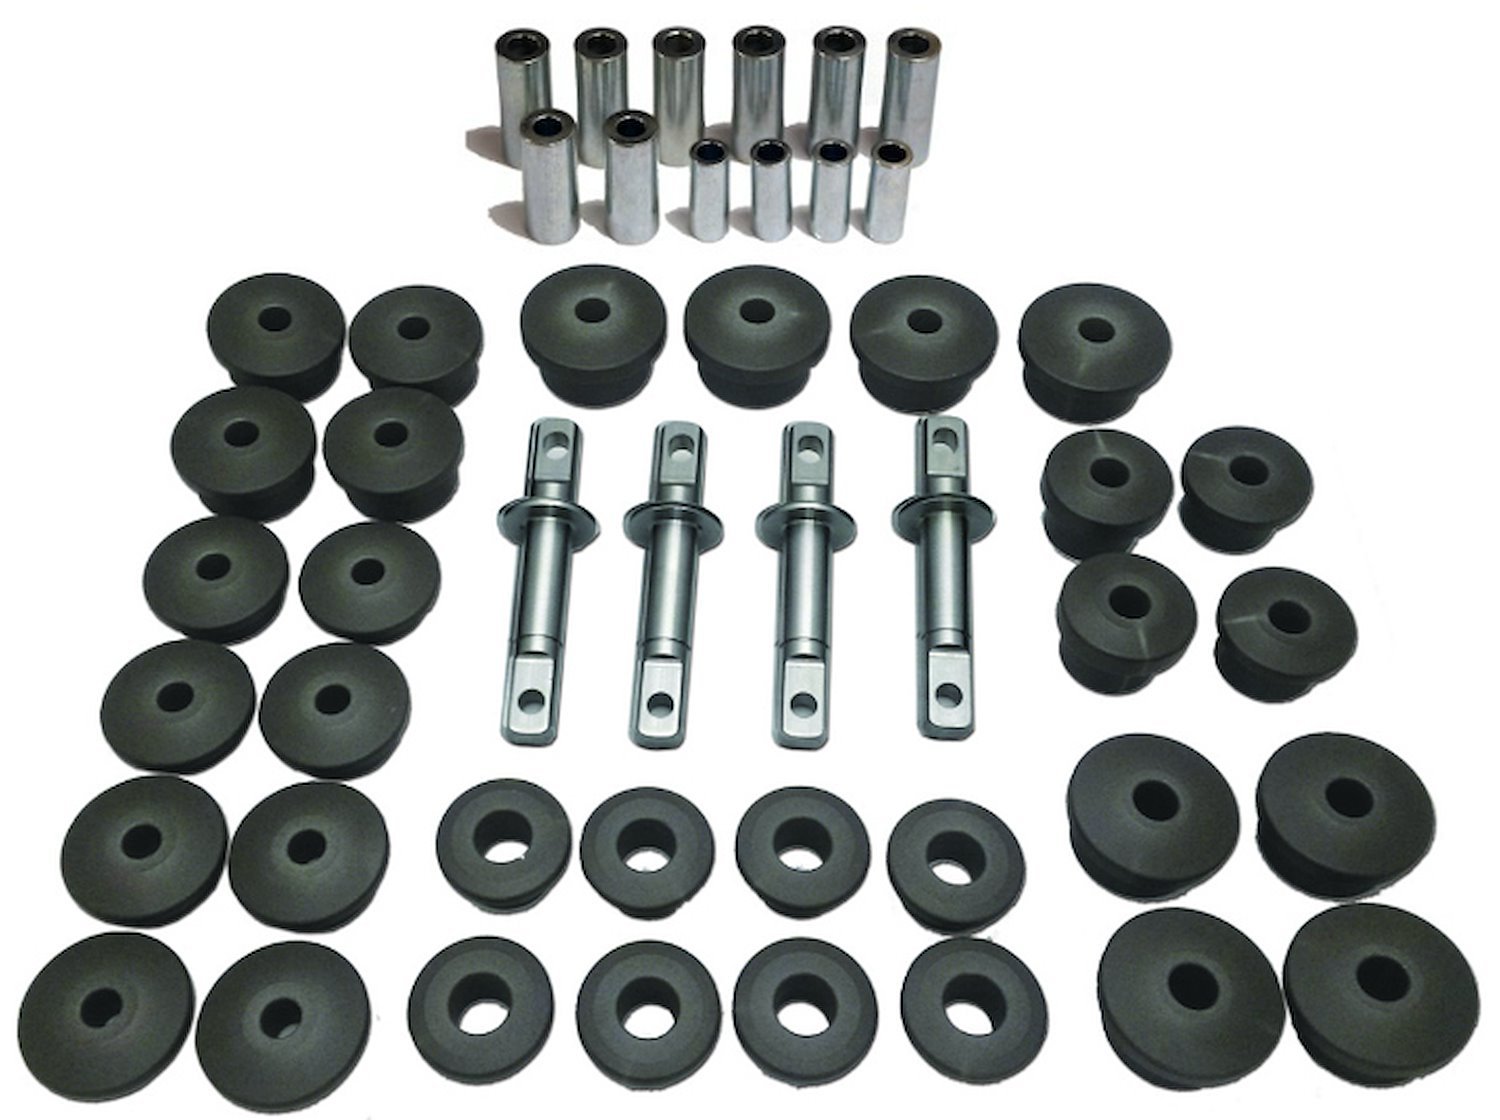 Delrin Control Arm Bushing Kit for 1997-2013 Corvette. Includes front upper and lower Bushings rear